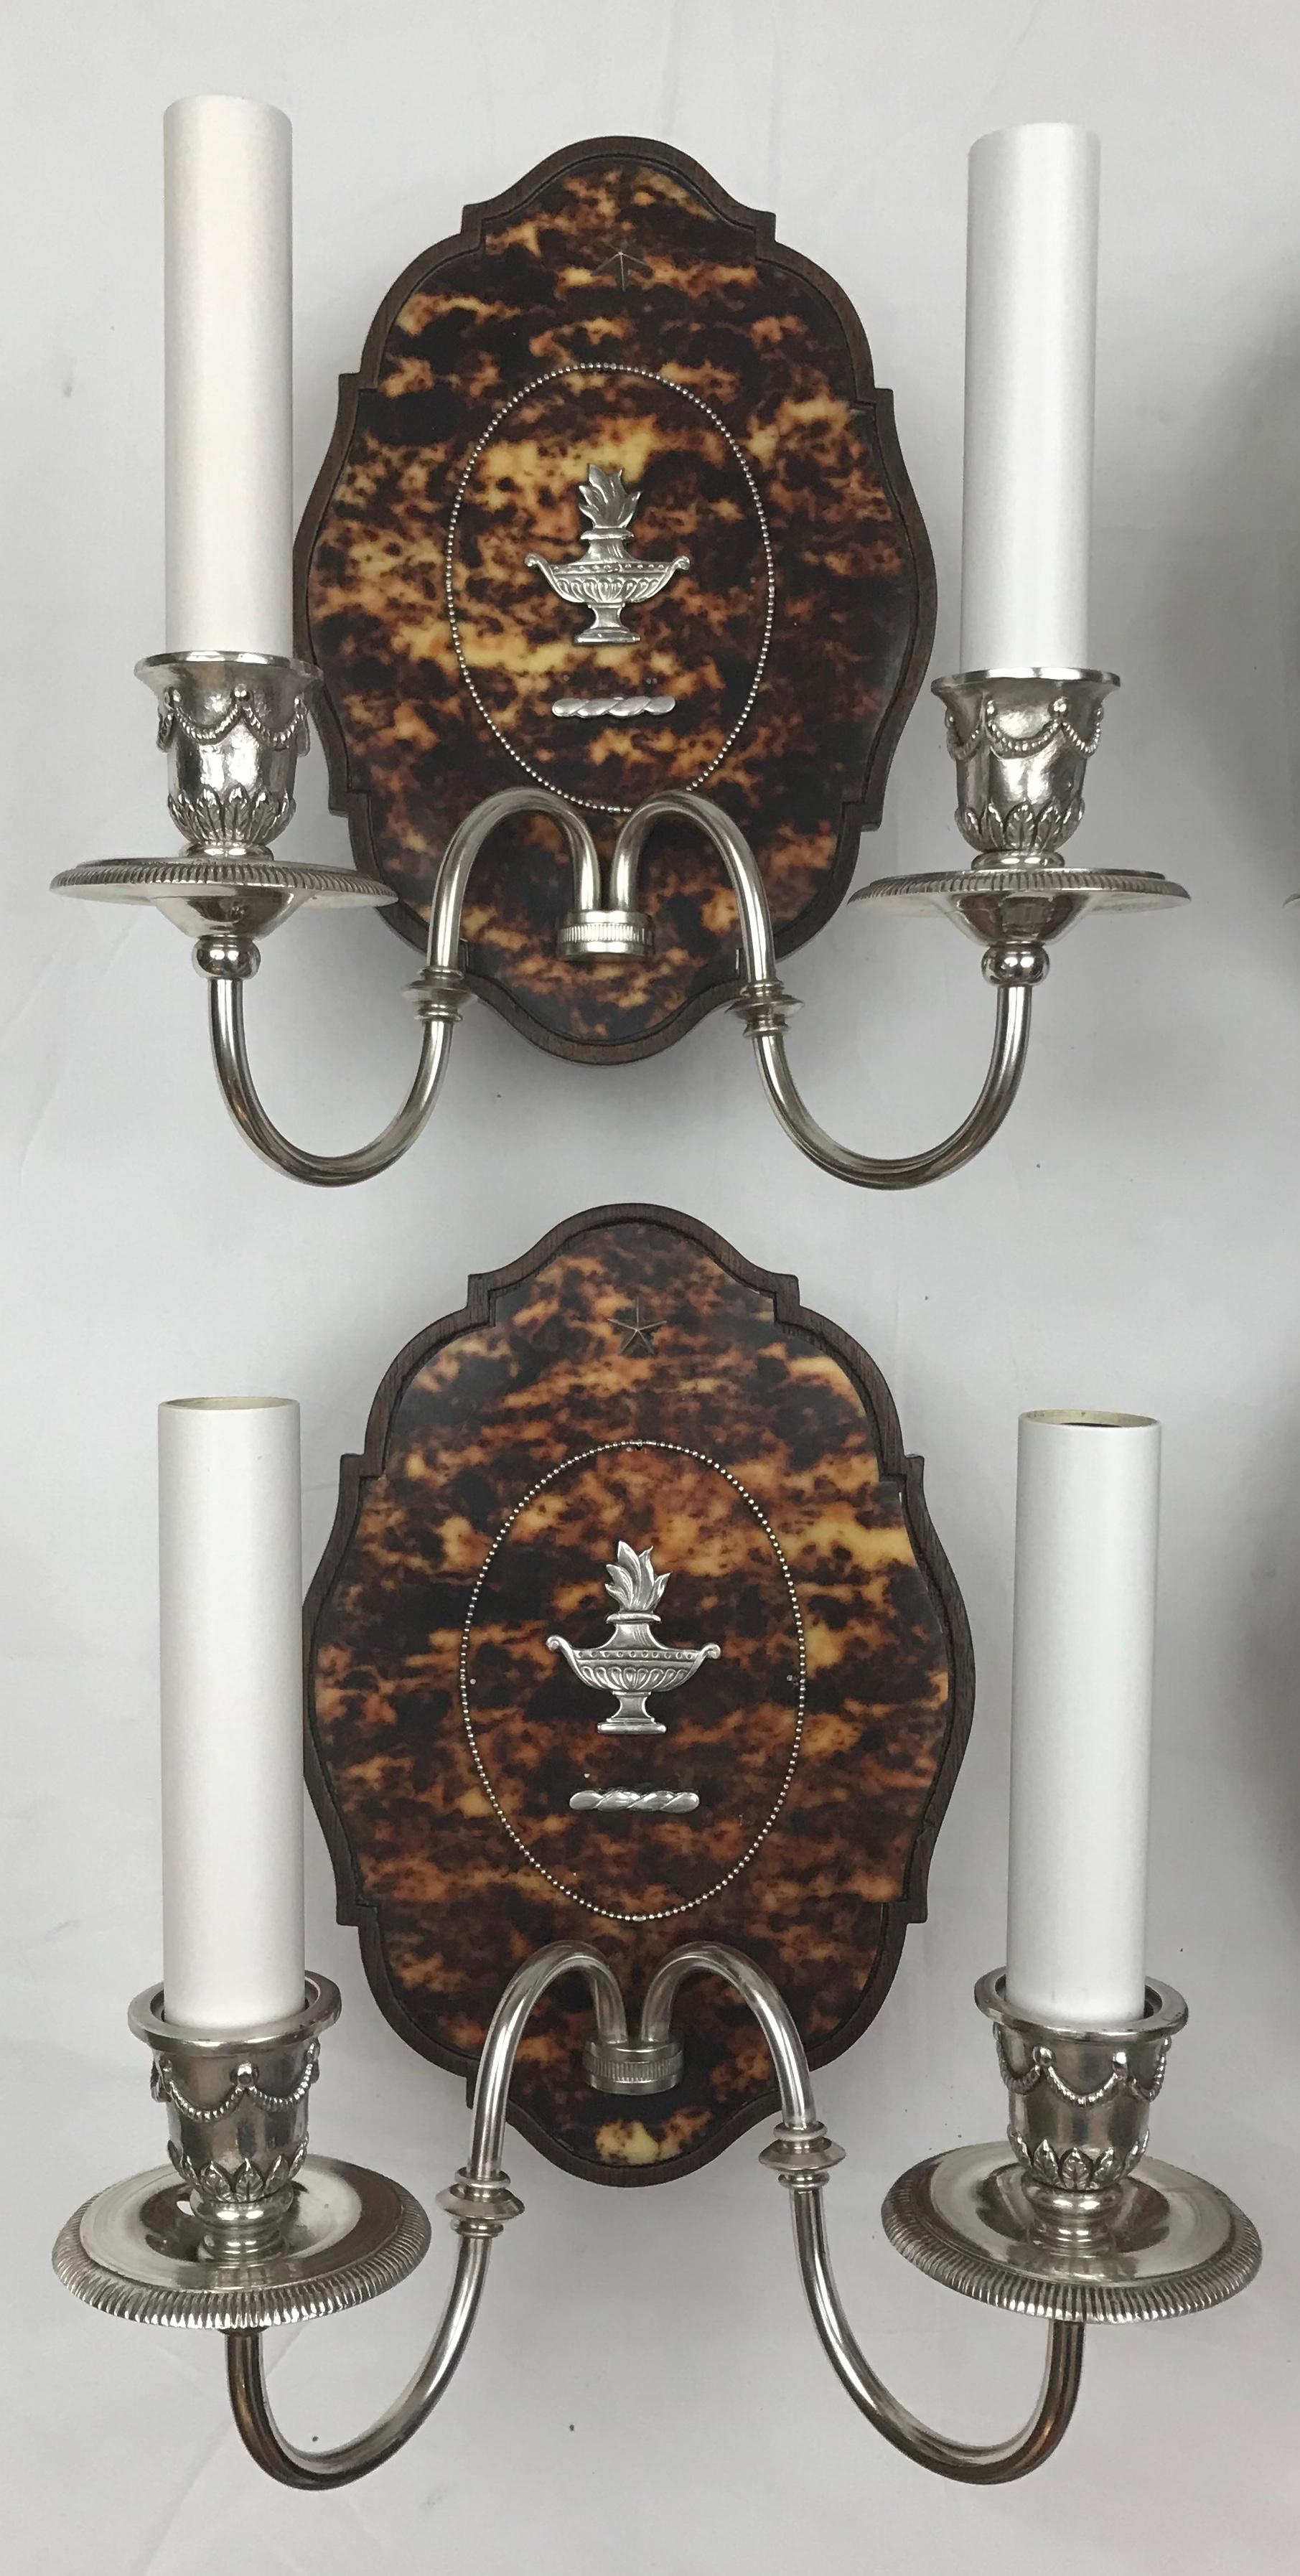 These exceptional sconces are by the renown maker Edward F. Caldwell & Co.  The cartouche form carved walnut backplates feature silver mounts on beautifully figured tortoise shell. The sconces are newly rewired, and are ready for use.